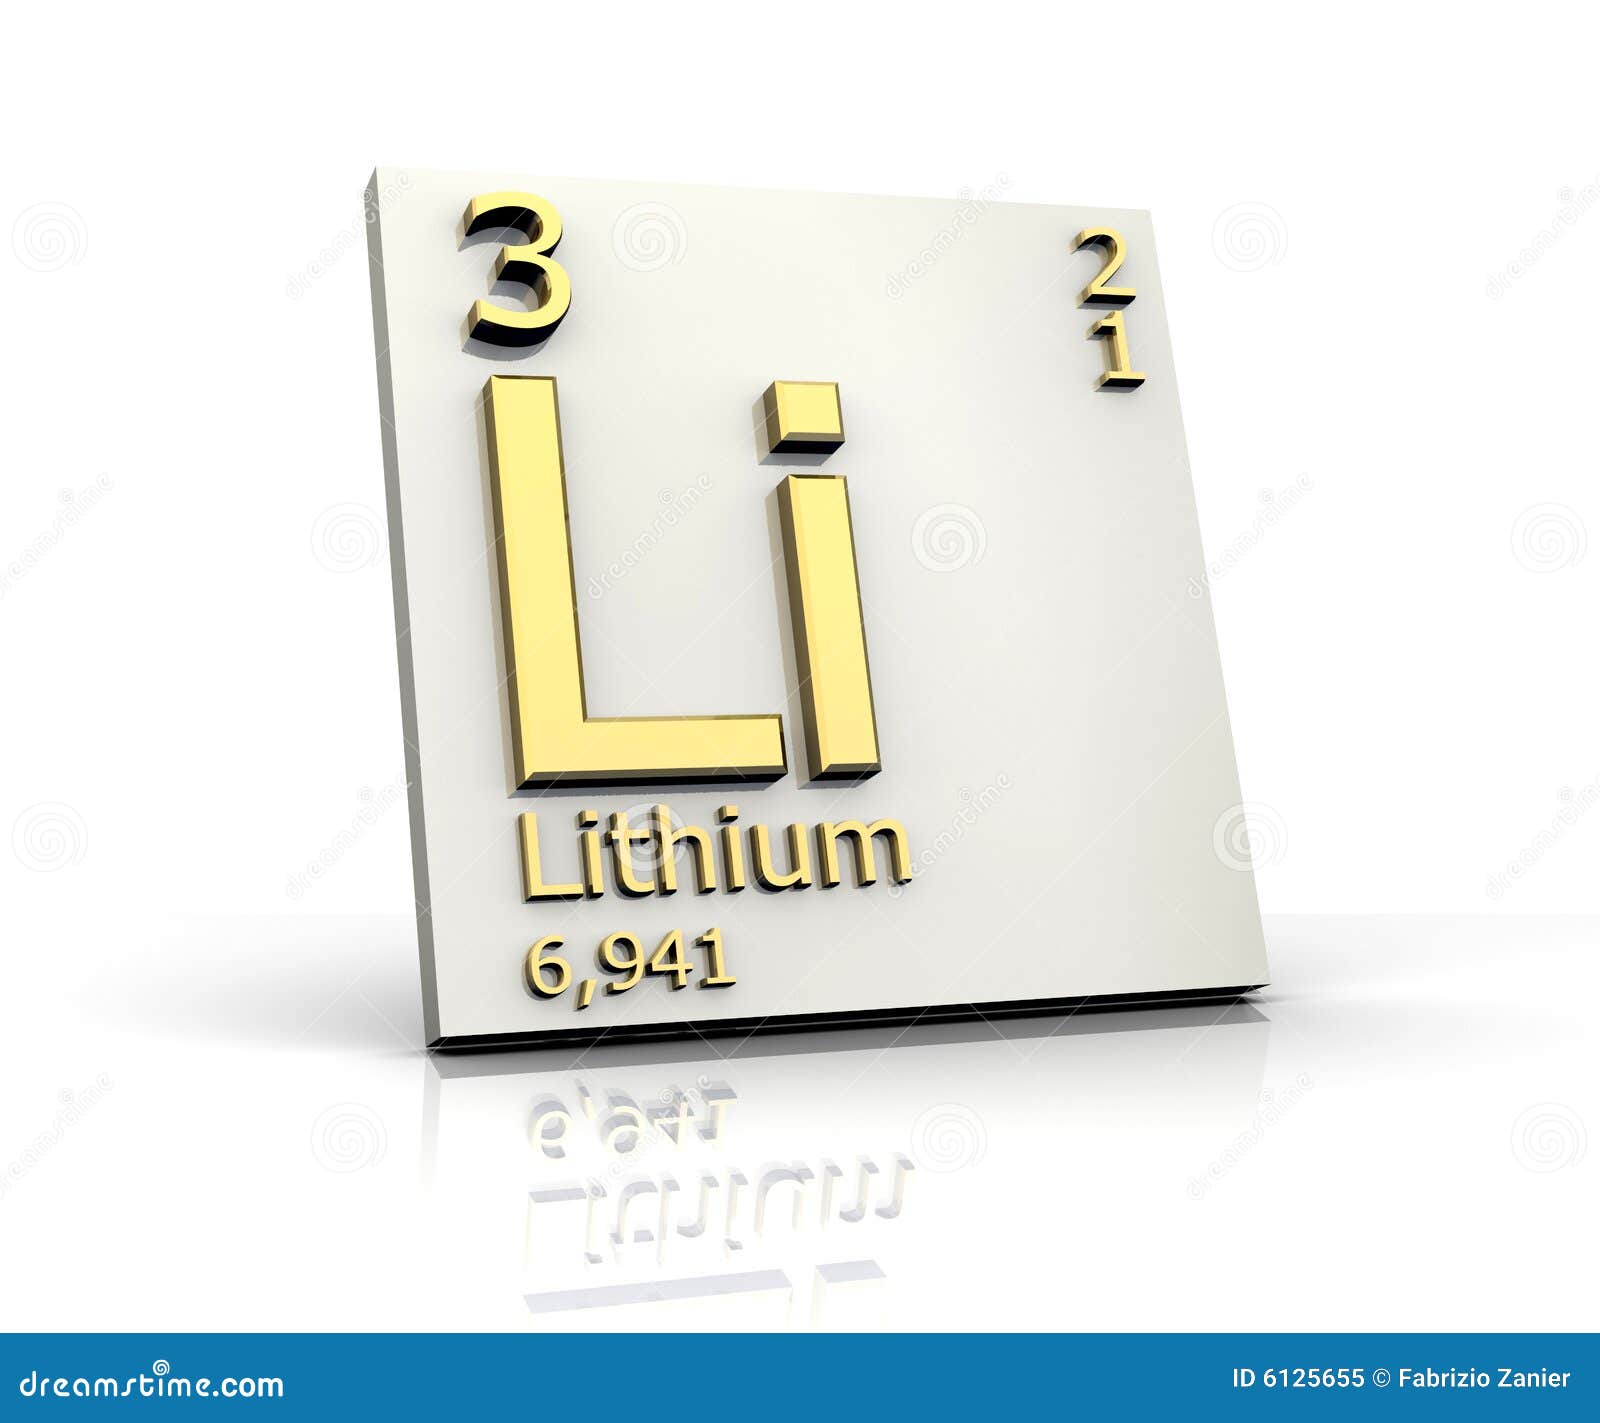 Lithium Form Periodic Table Of Elements Royalty Free Stock Photo 